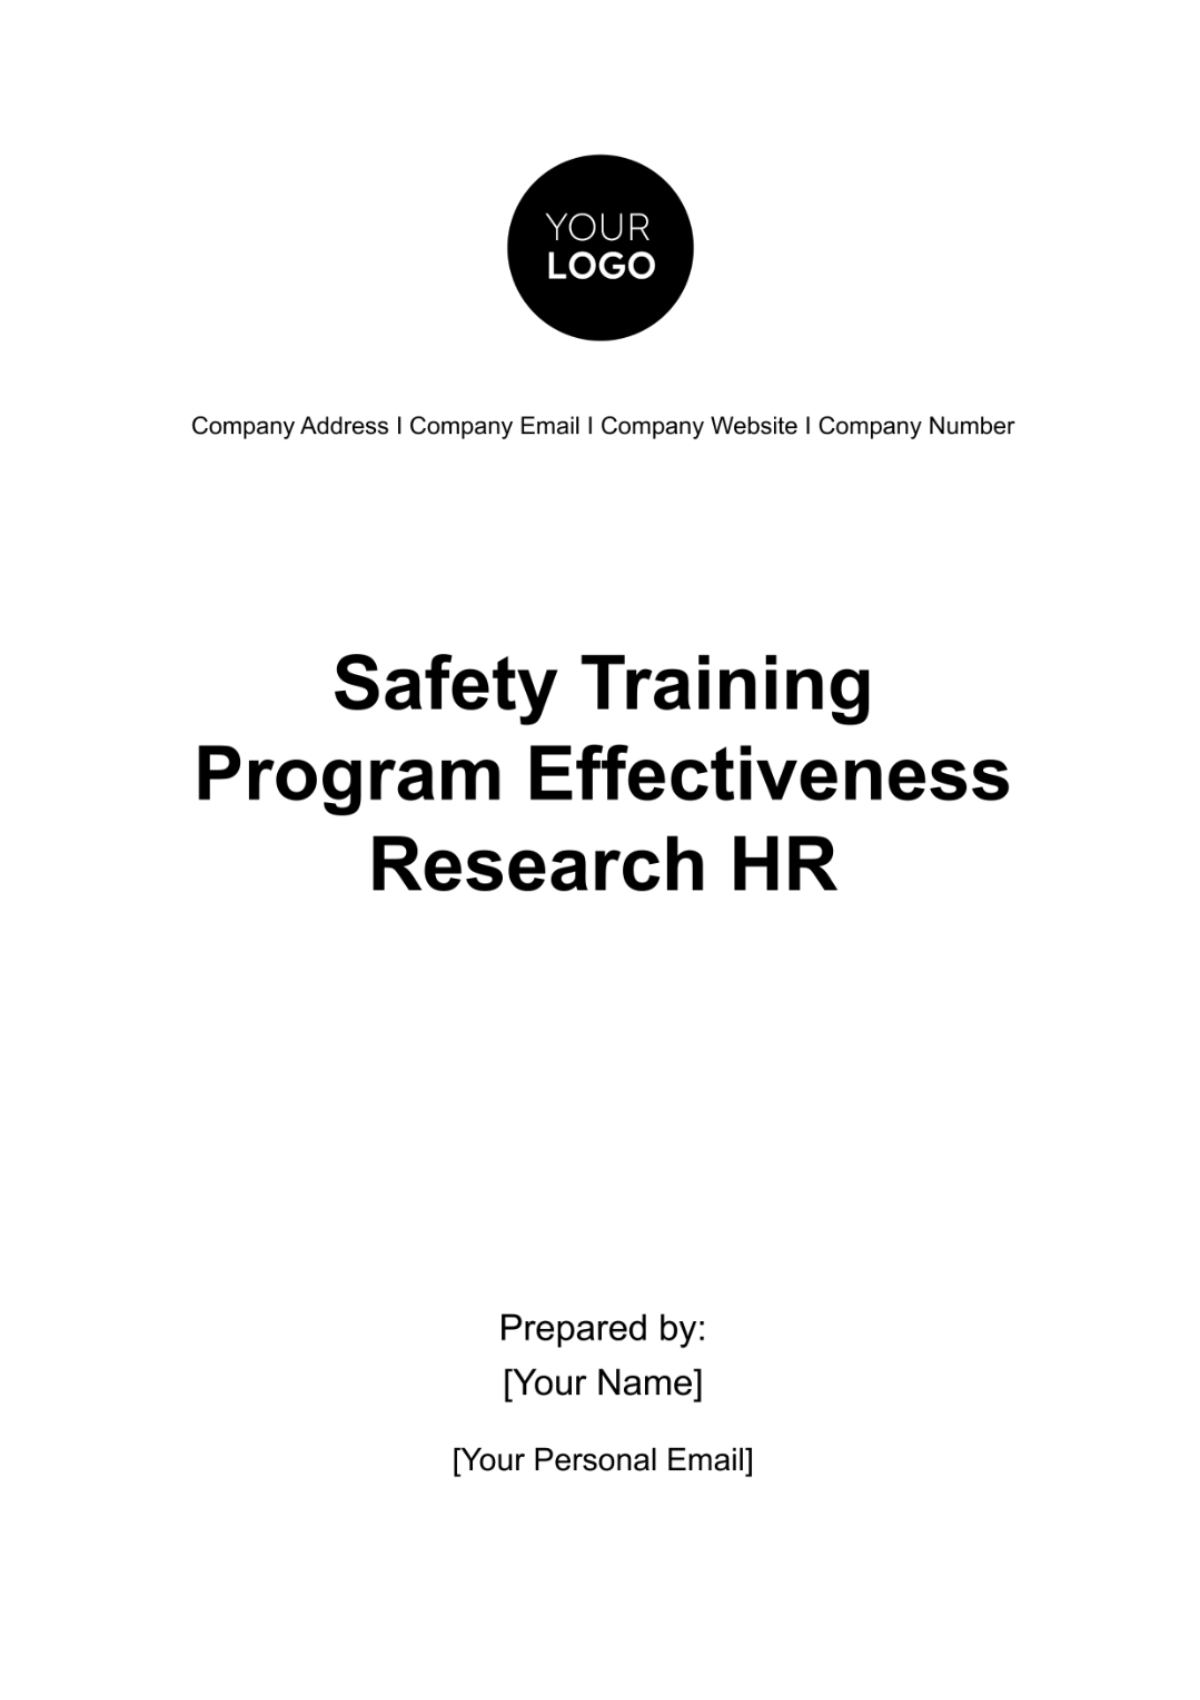 Safety Training Program Effectiveness Research HR Template